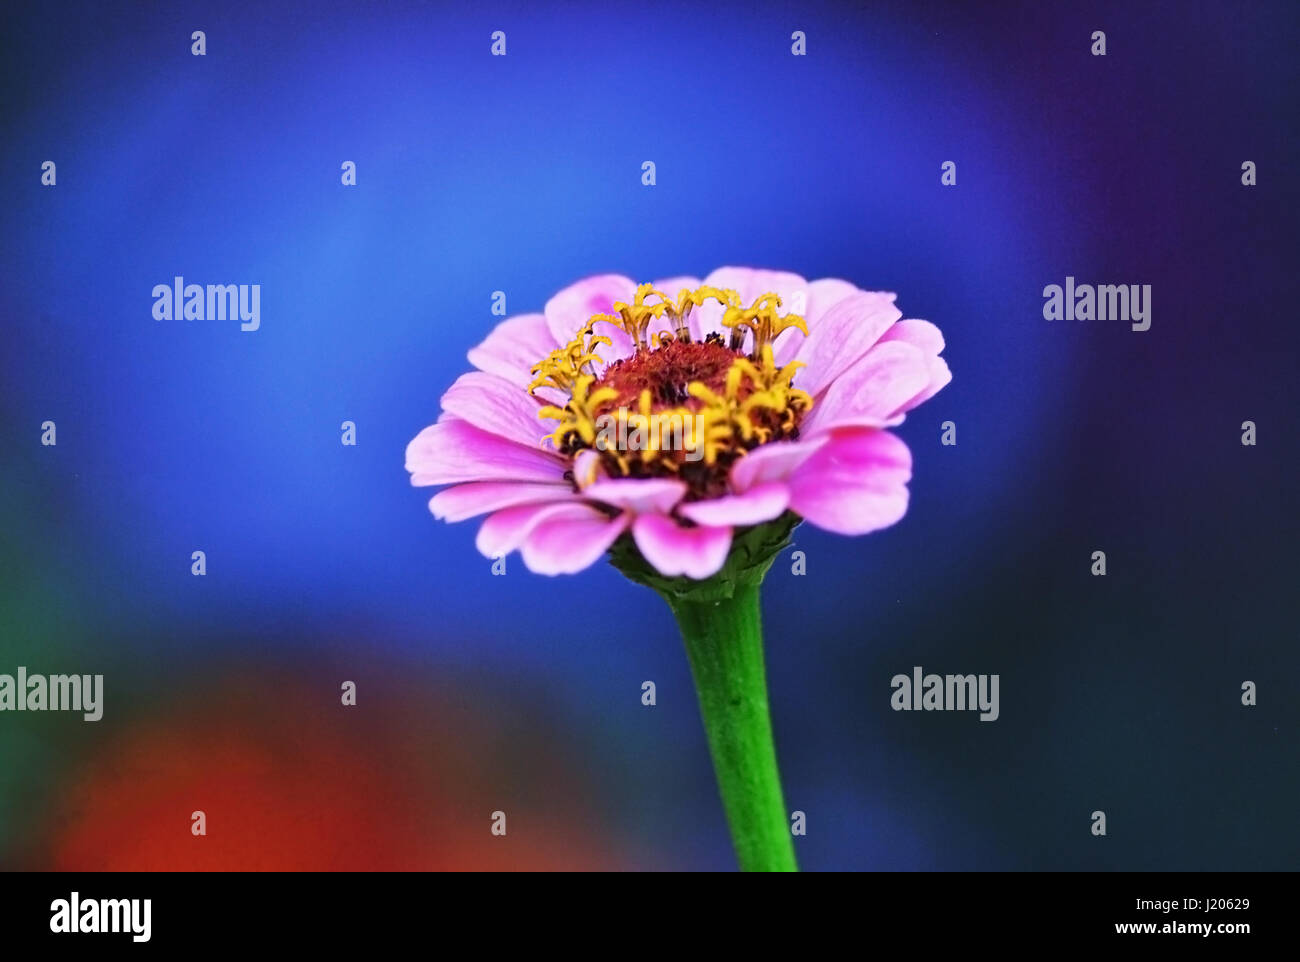 Pink China Aster on blue background. Stock Photo